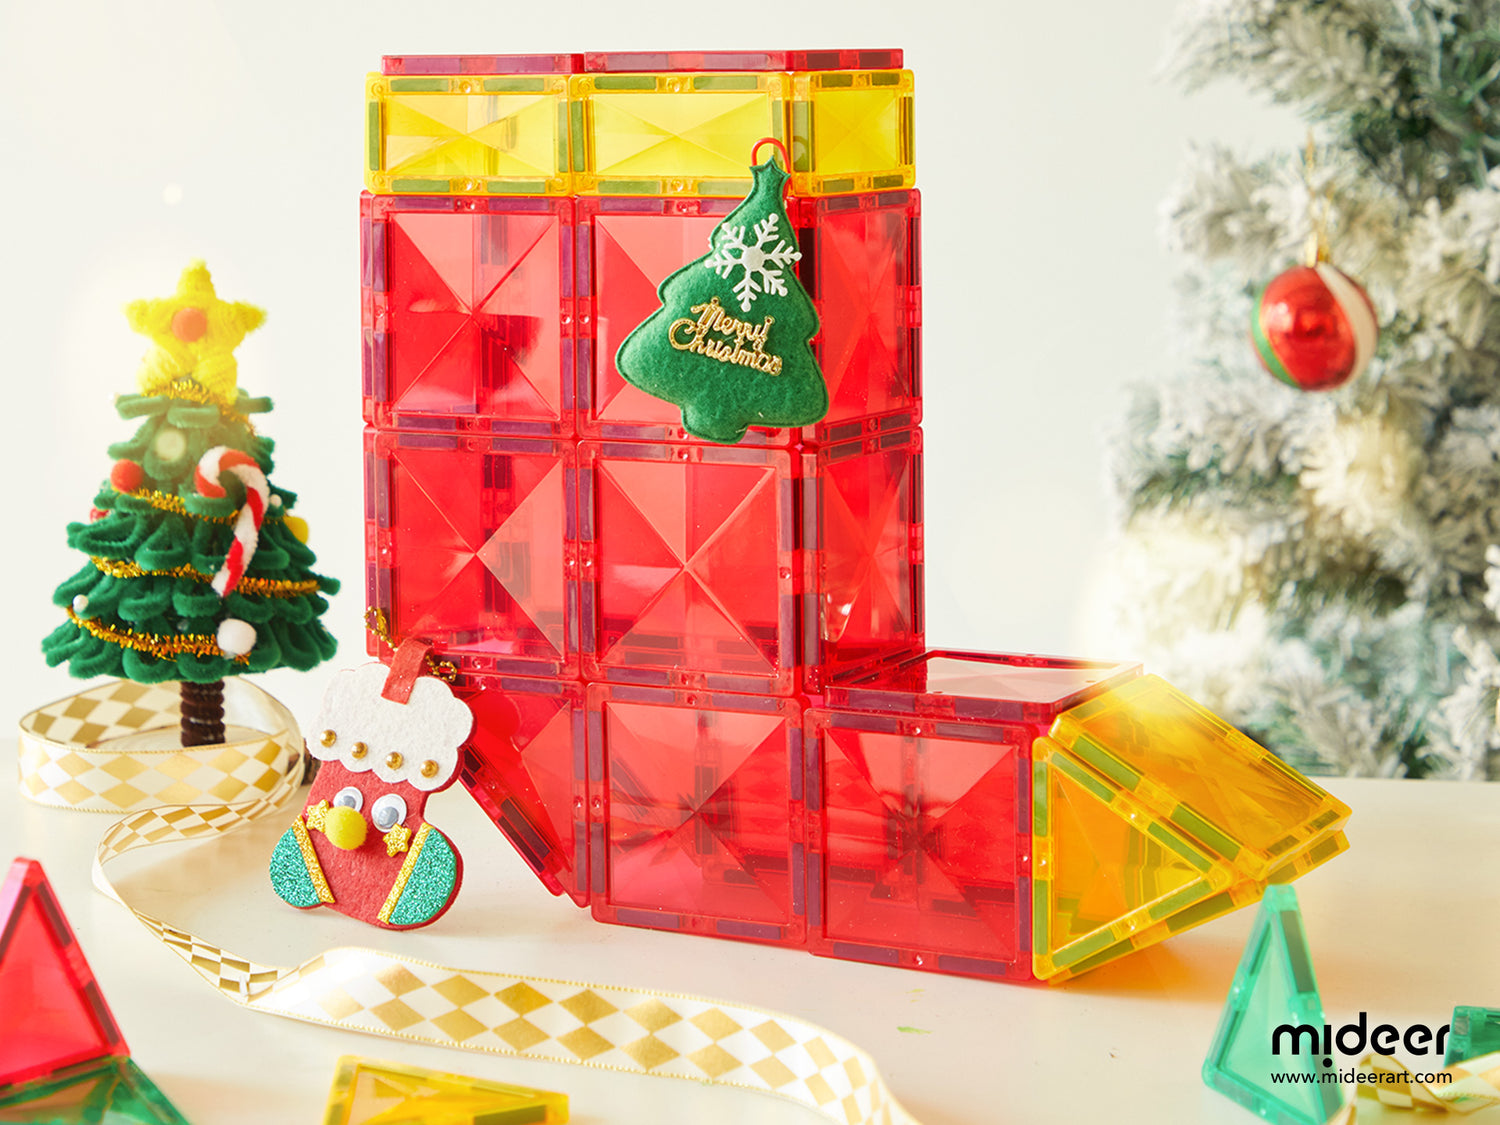 Magnetic Tiles Are the Perfect Christmas Present for Kids